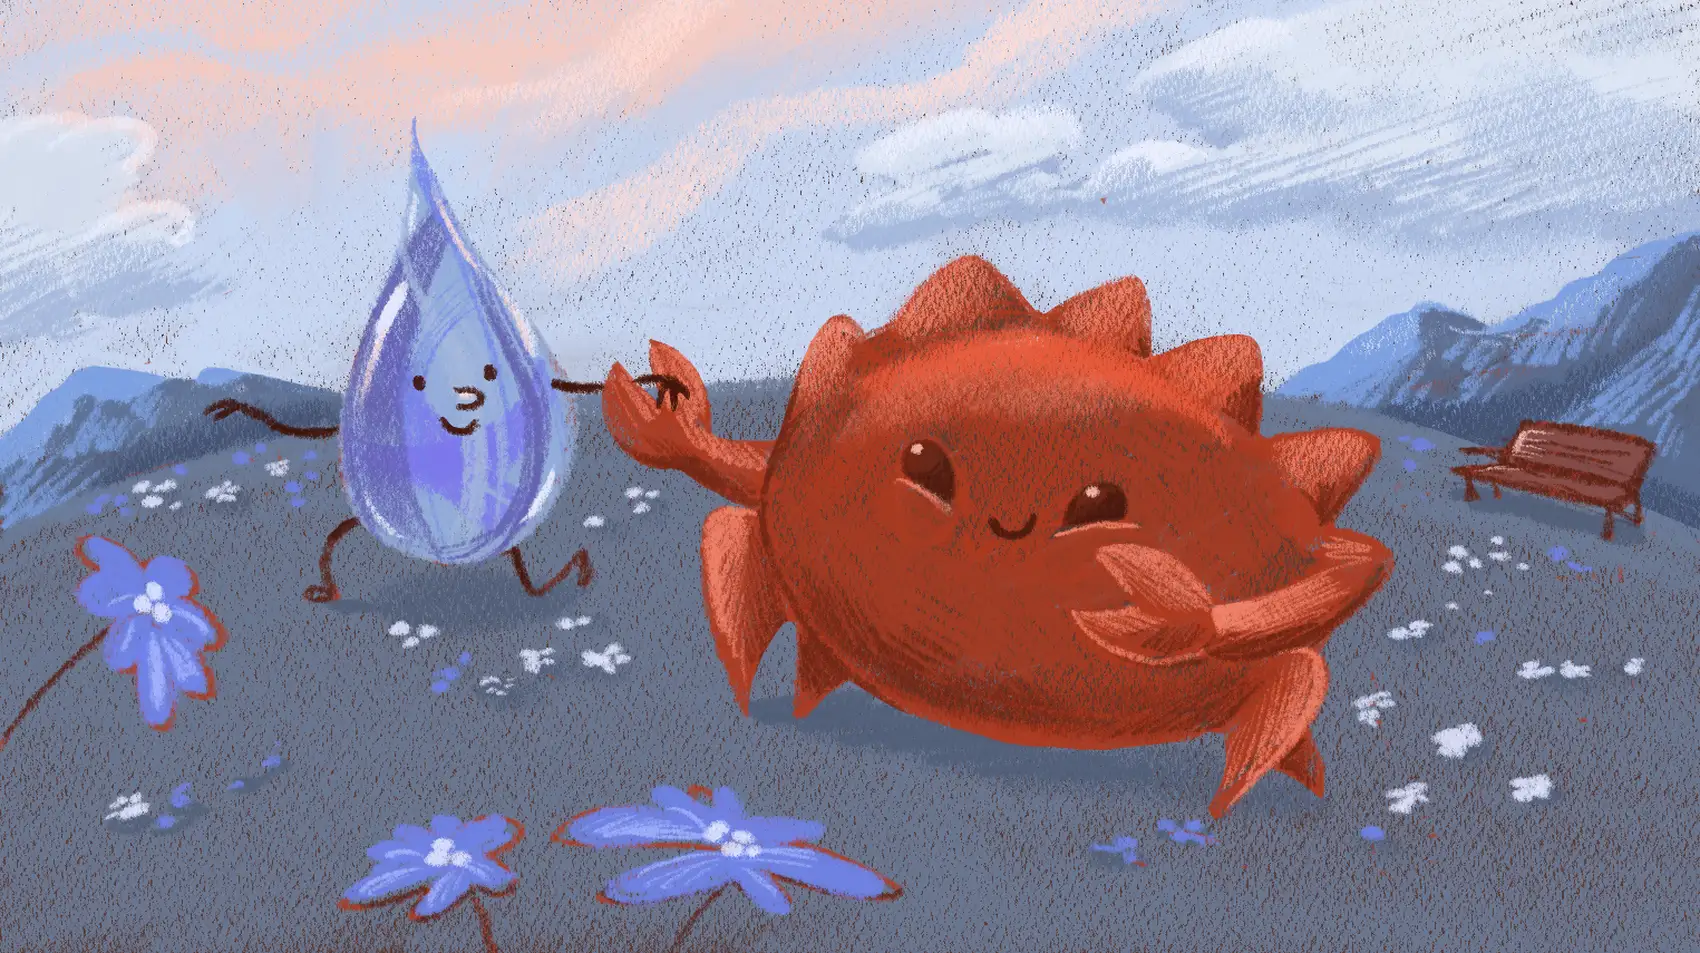 An purple droplet representing Elixir and a red crab, Ferris, representing Rust.